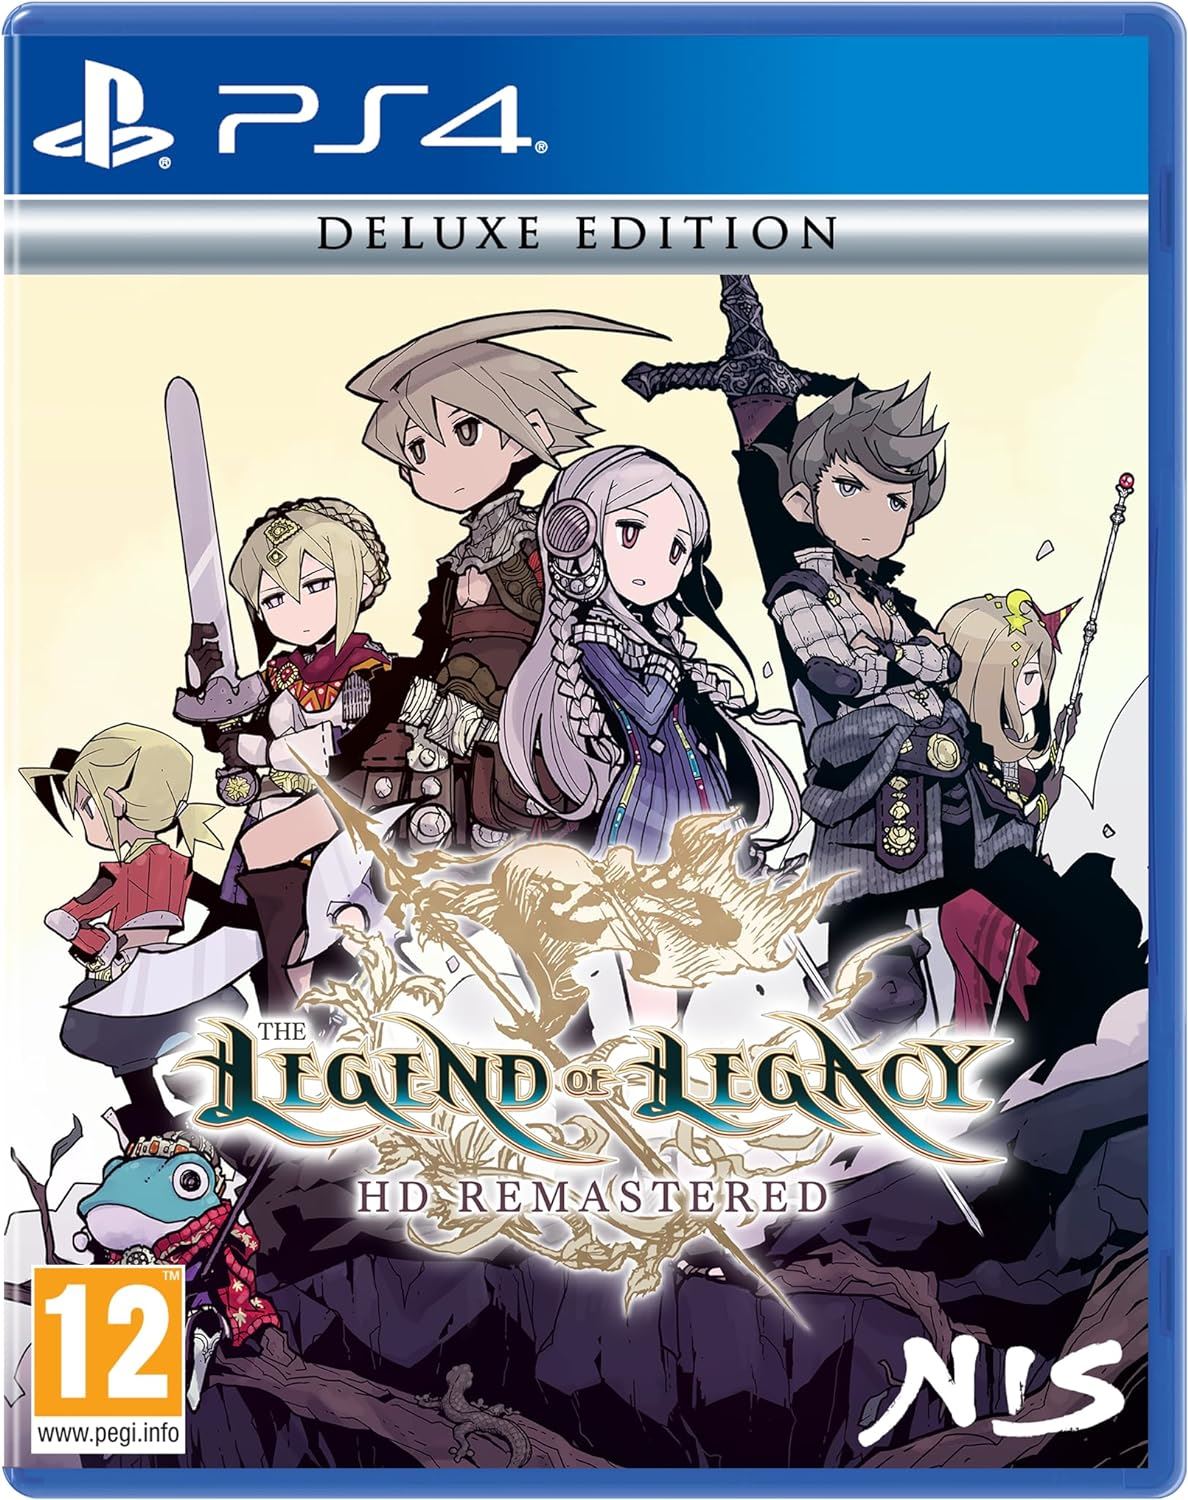 The Legend of Legacy HD Remastered Deluxe Edition PS4